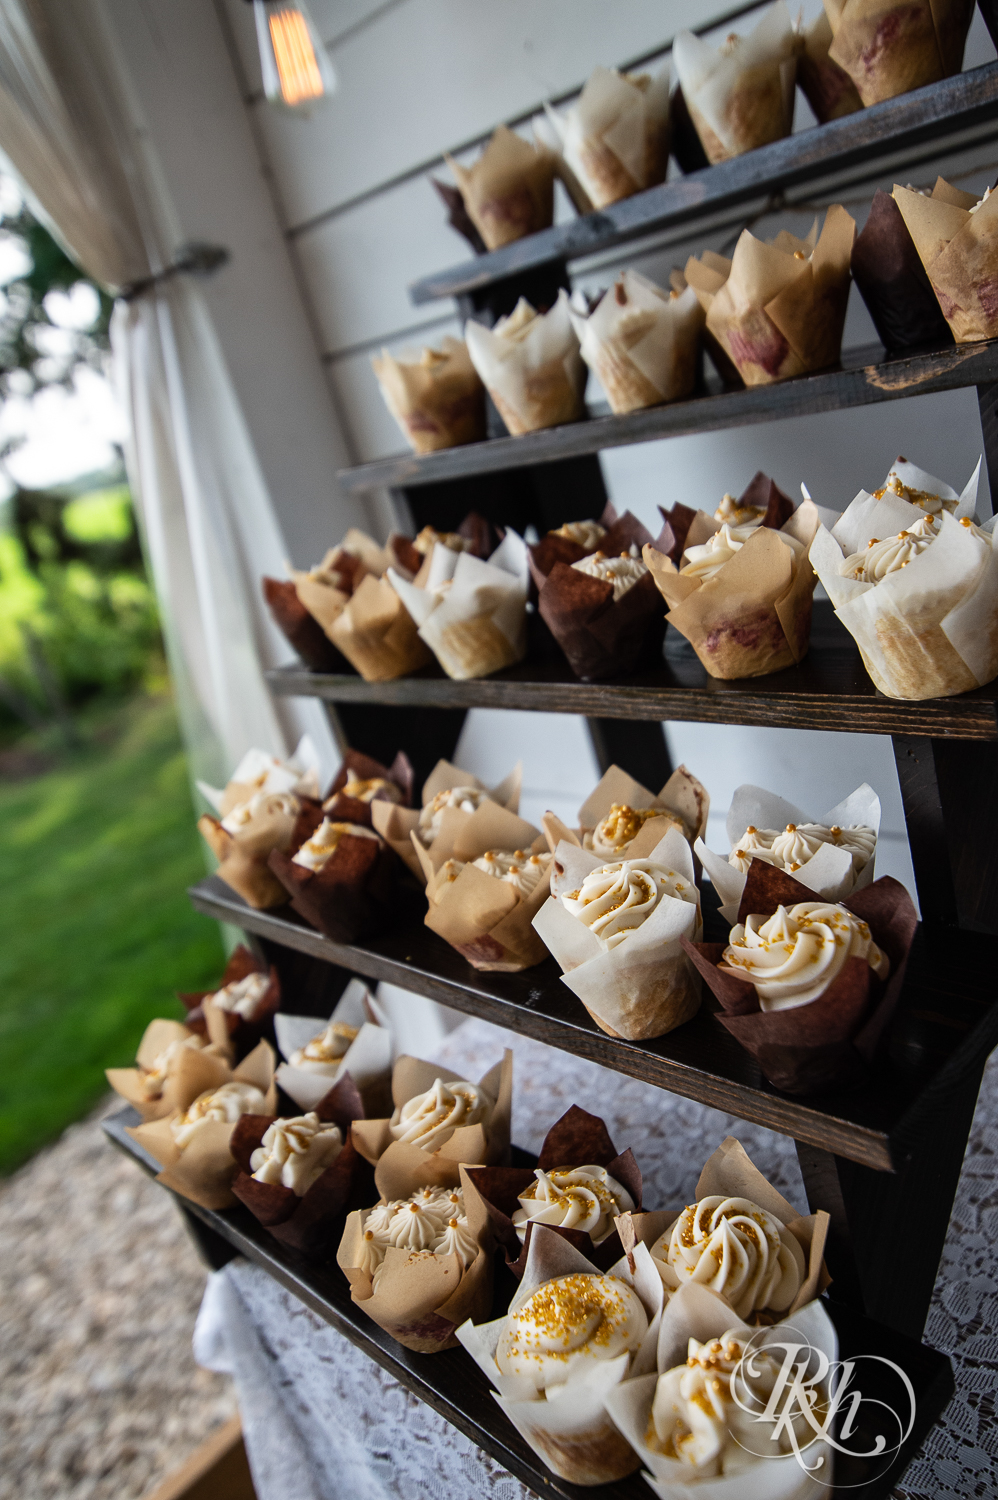 Wedding desert table with cupcakes at Legacy Hills Farm in Welch, Minnesota.